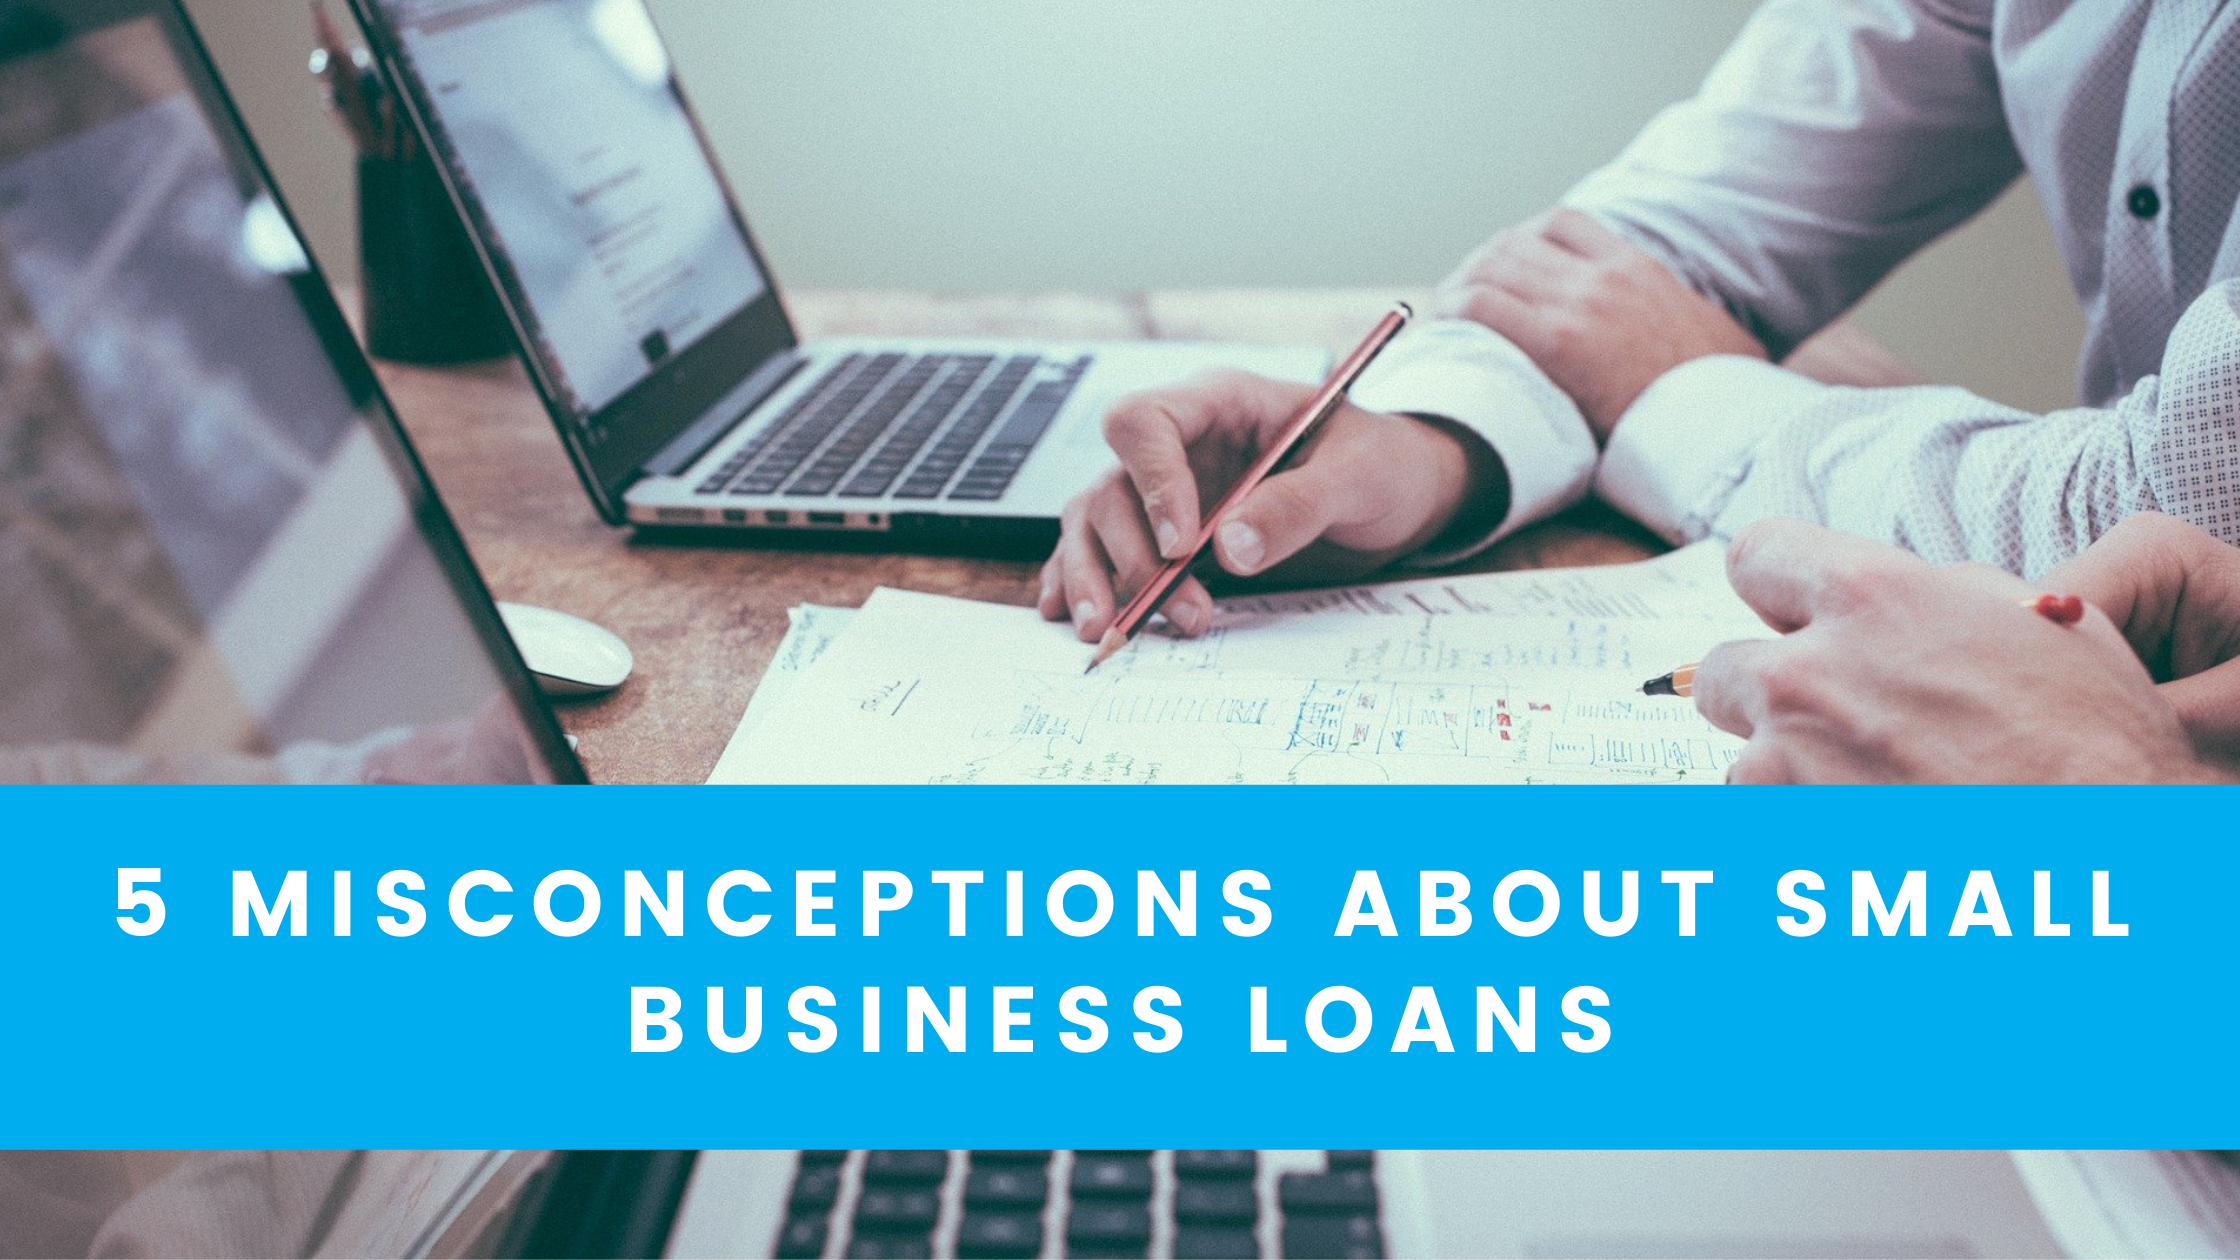 5 Misconceptions About Small Business Loans